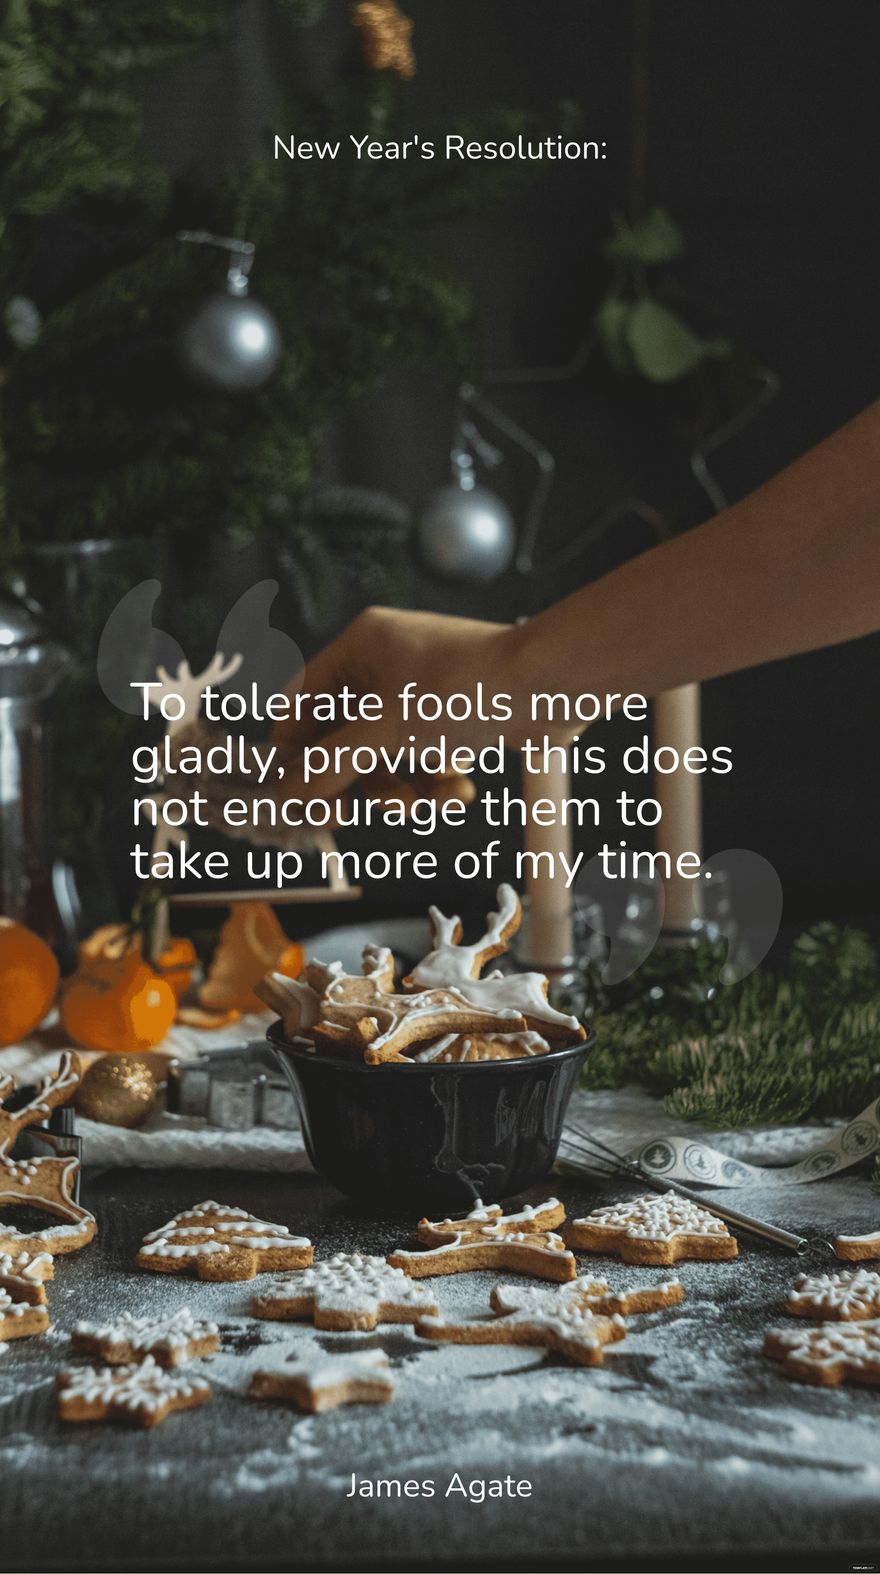 Free New Year's Resolution: To tolerate fools more gladly, provided this does not encourage them to take up more of my time.